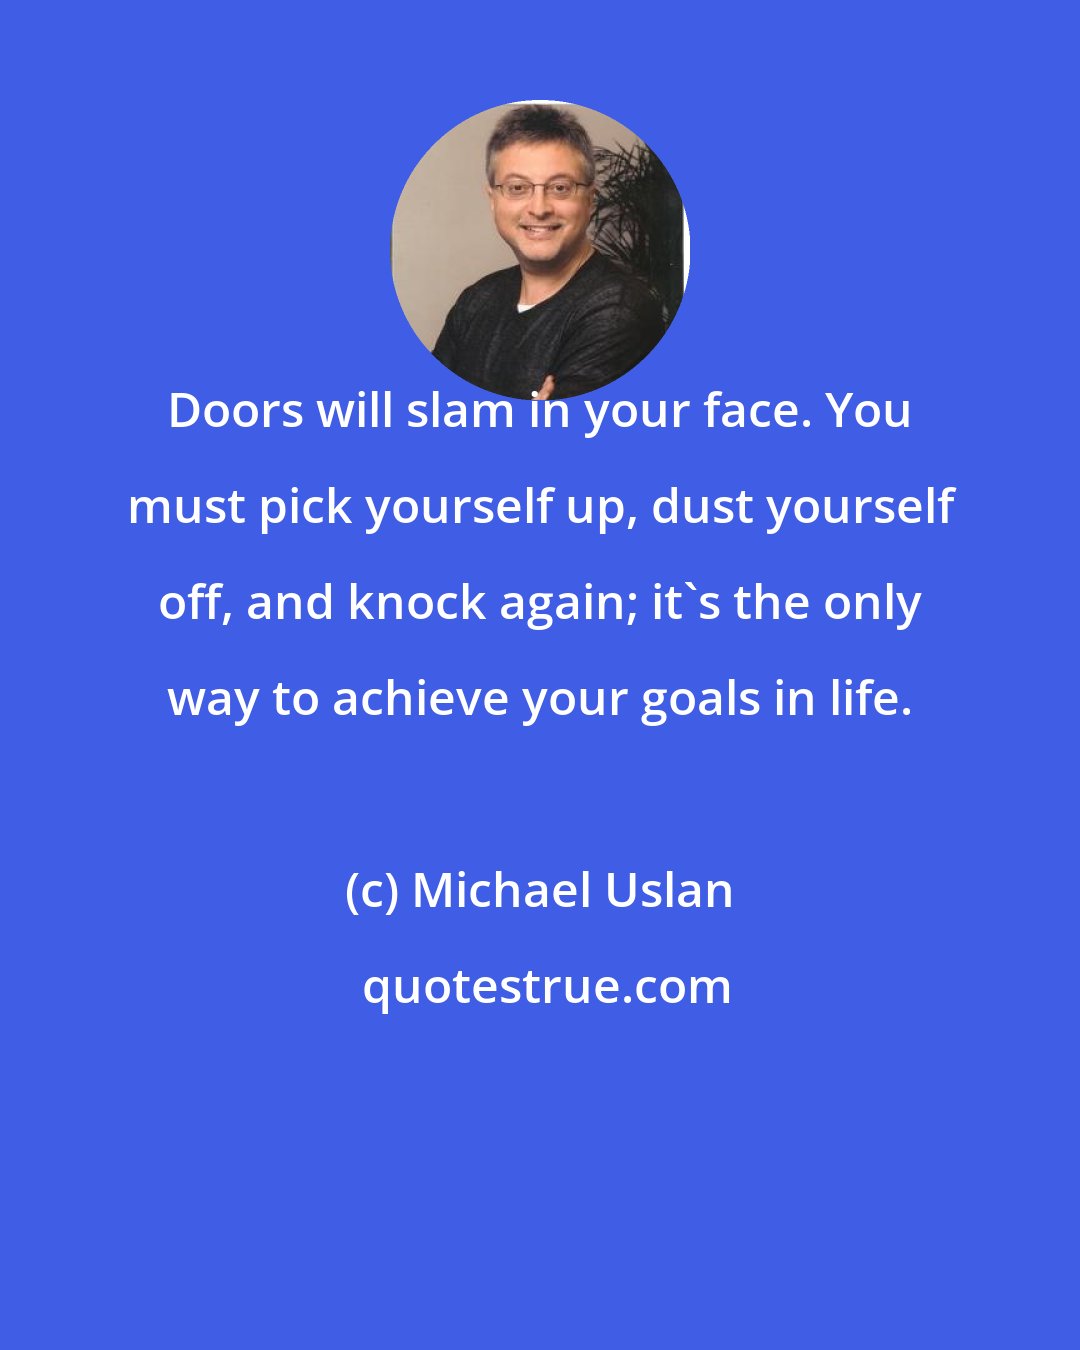 Michael Uslan: Doors will slam in your face. You must pick yourself up, dust yourself off, and knock again; it's the only way to achieve your goals in life.